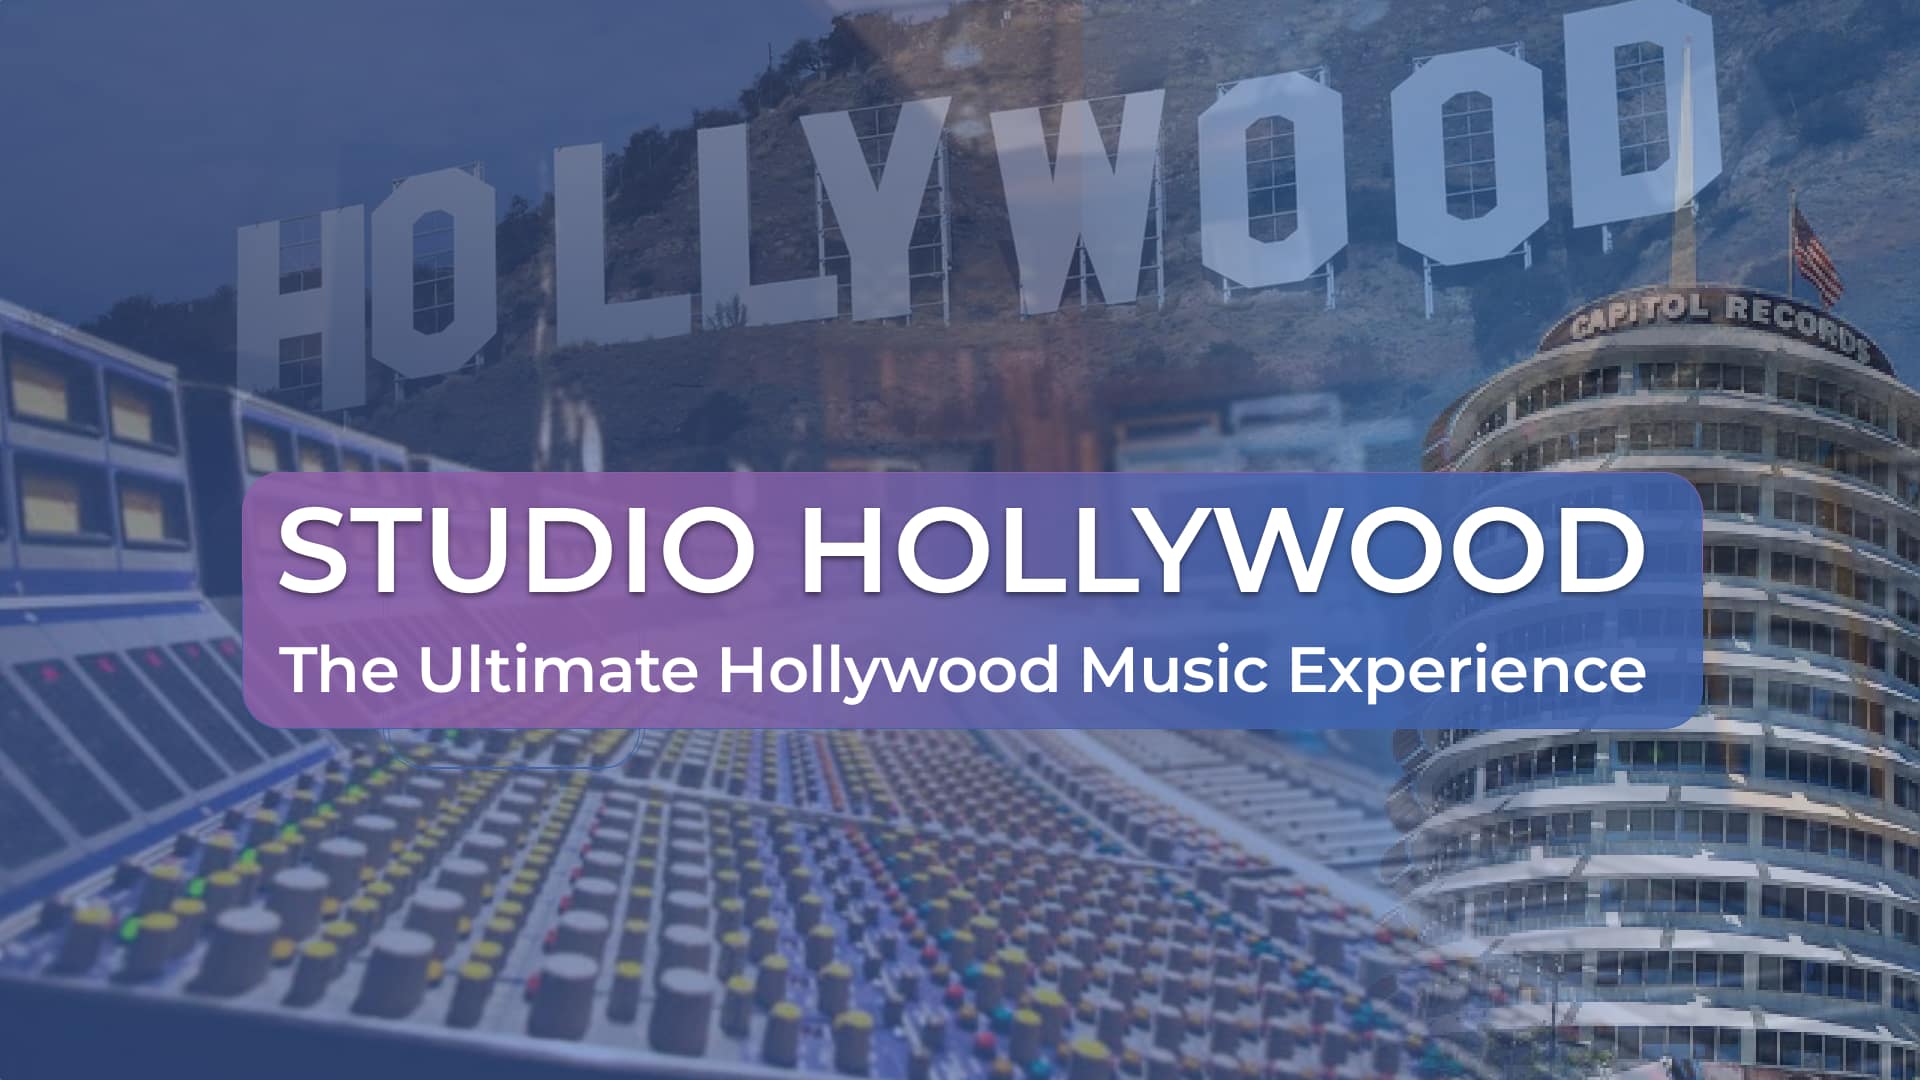 Studio Hollywood event Title